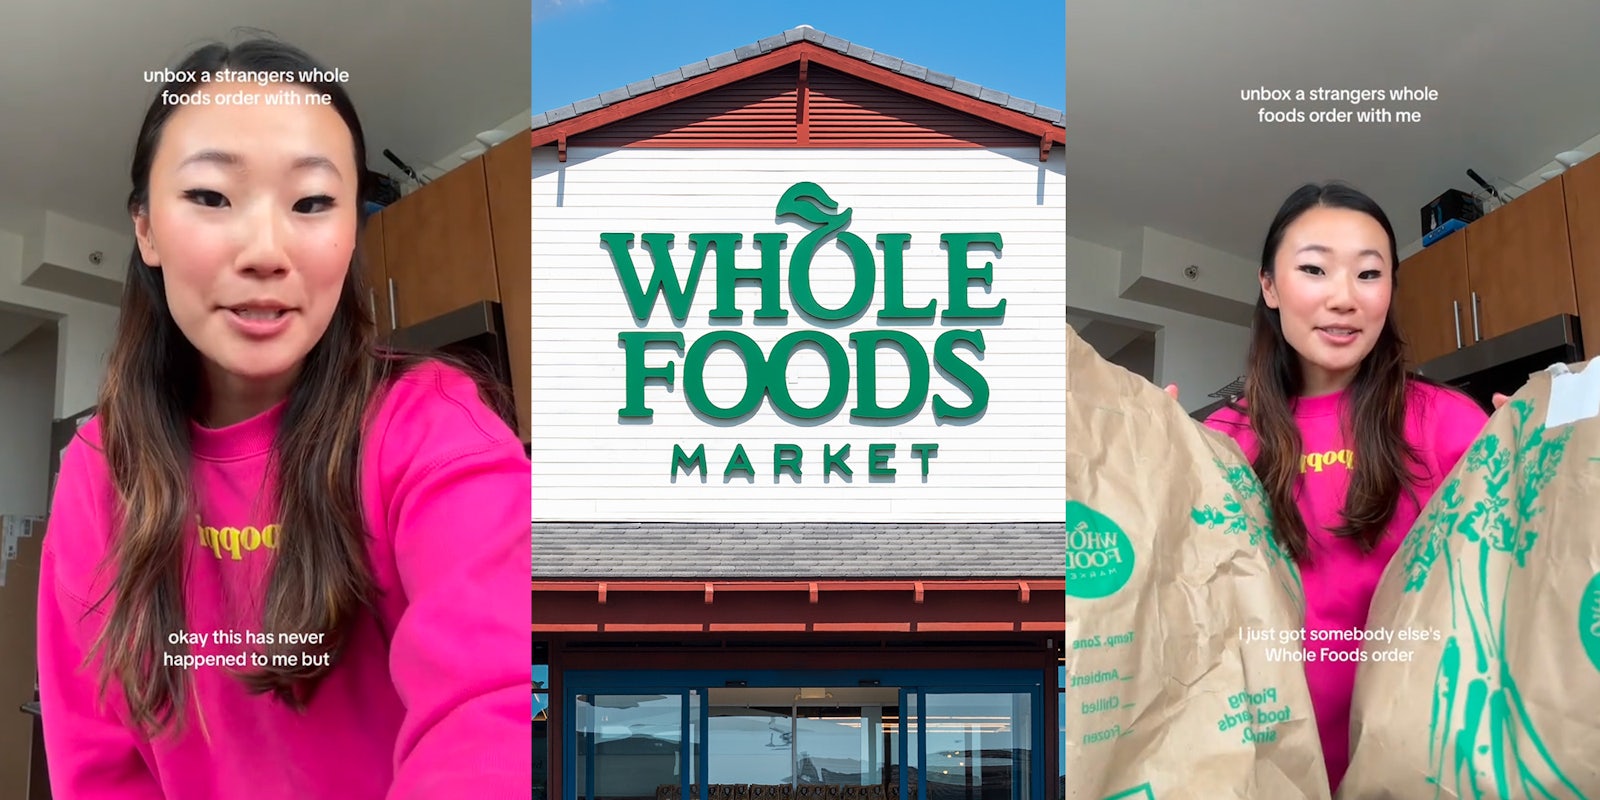 Woman accidentally receives stranger's Whole Foods order